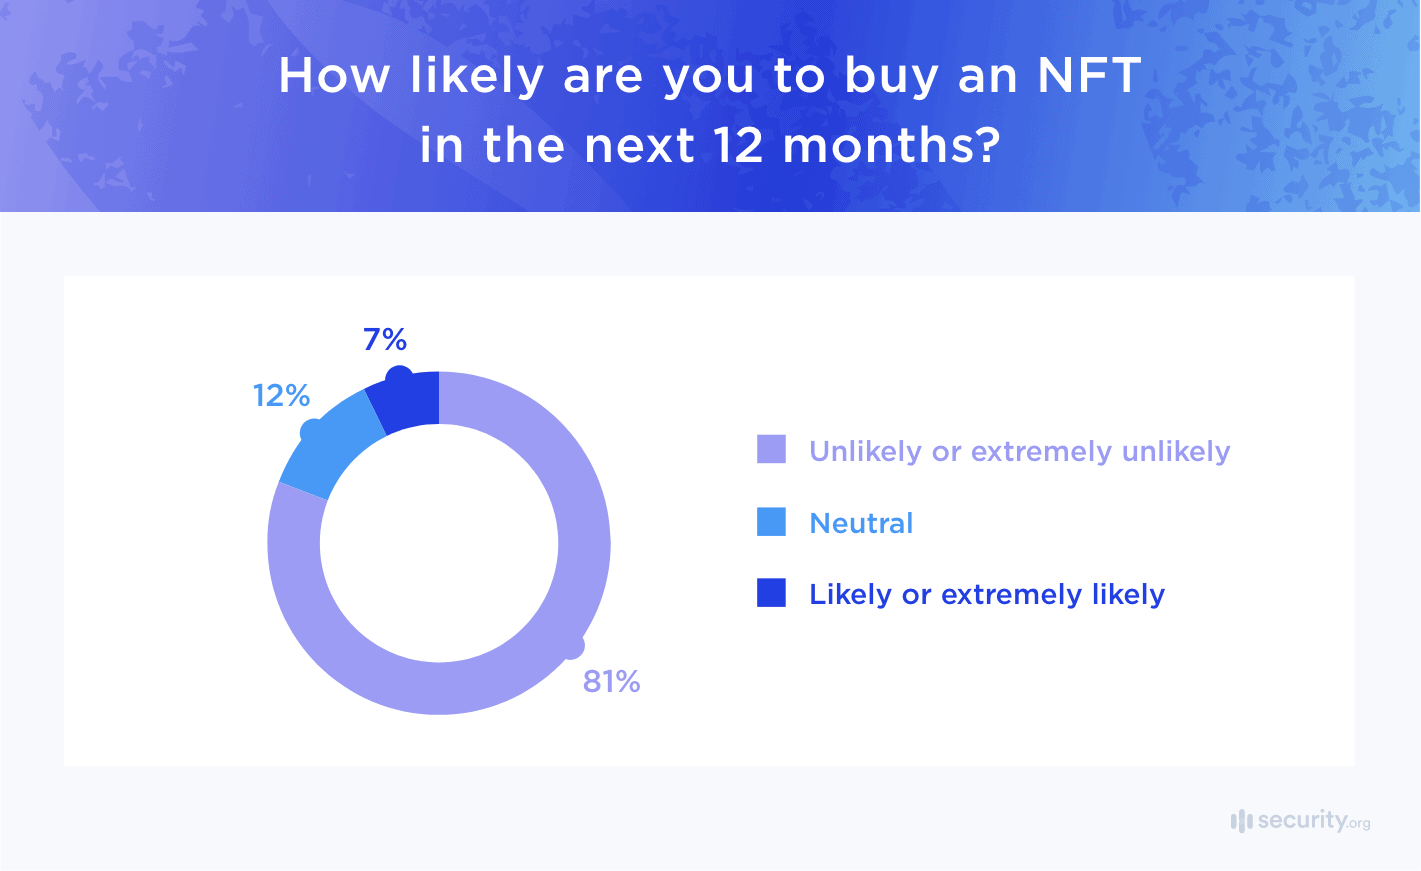 how likely are you to buy NFT next 12 months